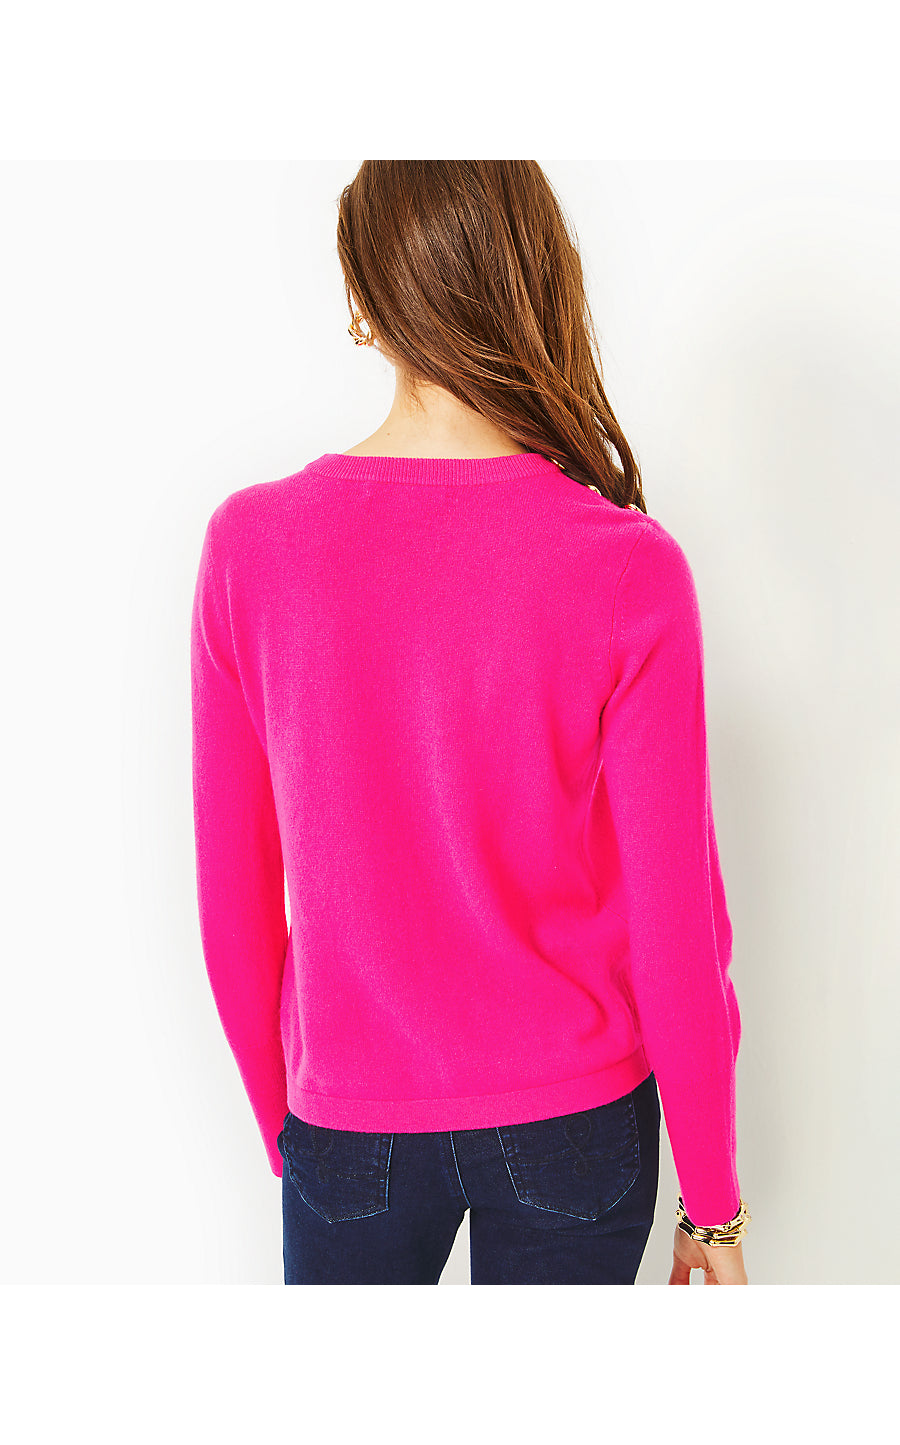 BRINKLEY CASHMERE SWEATER - PINK PALMS